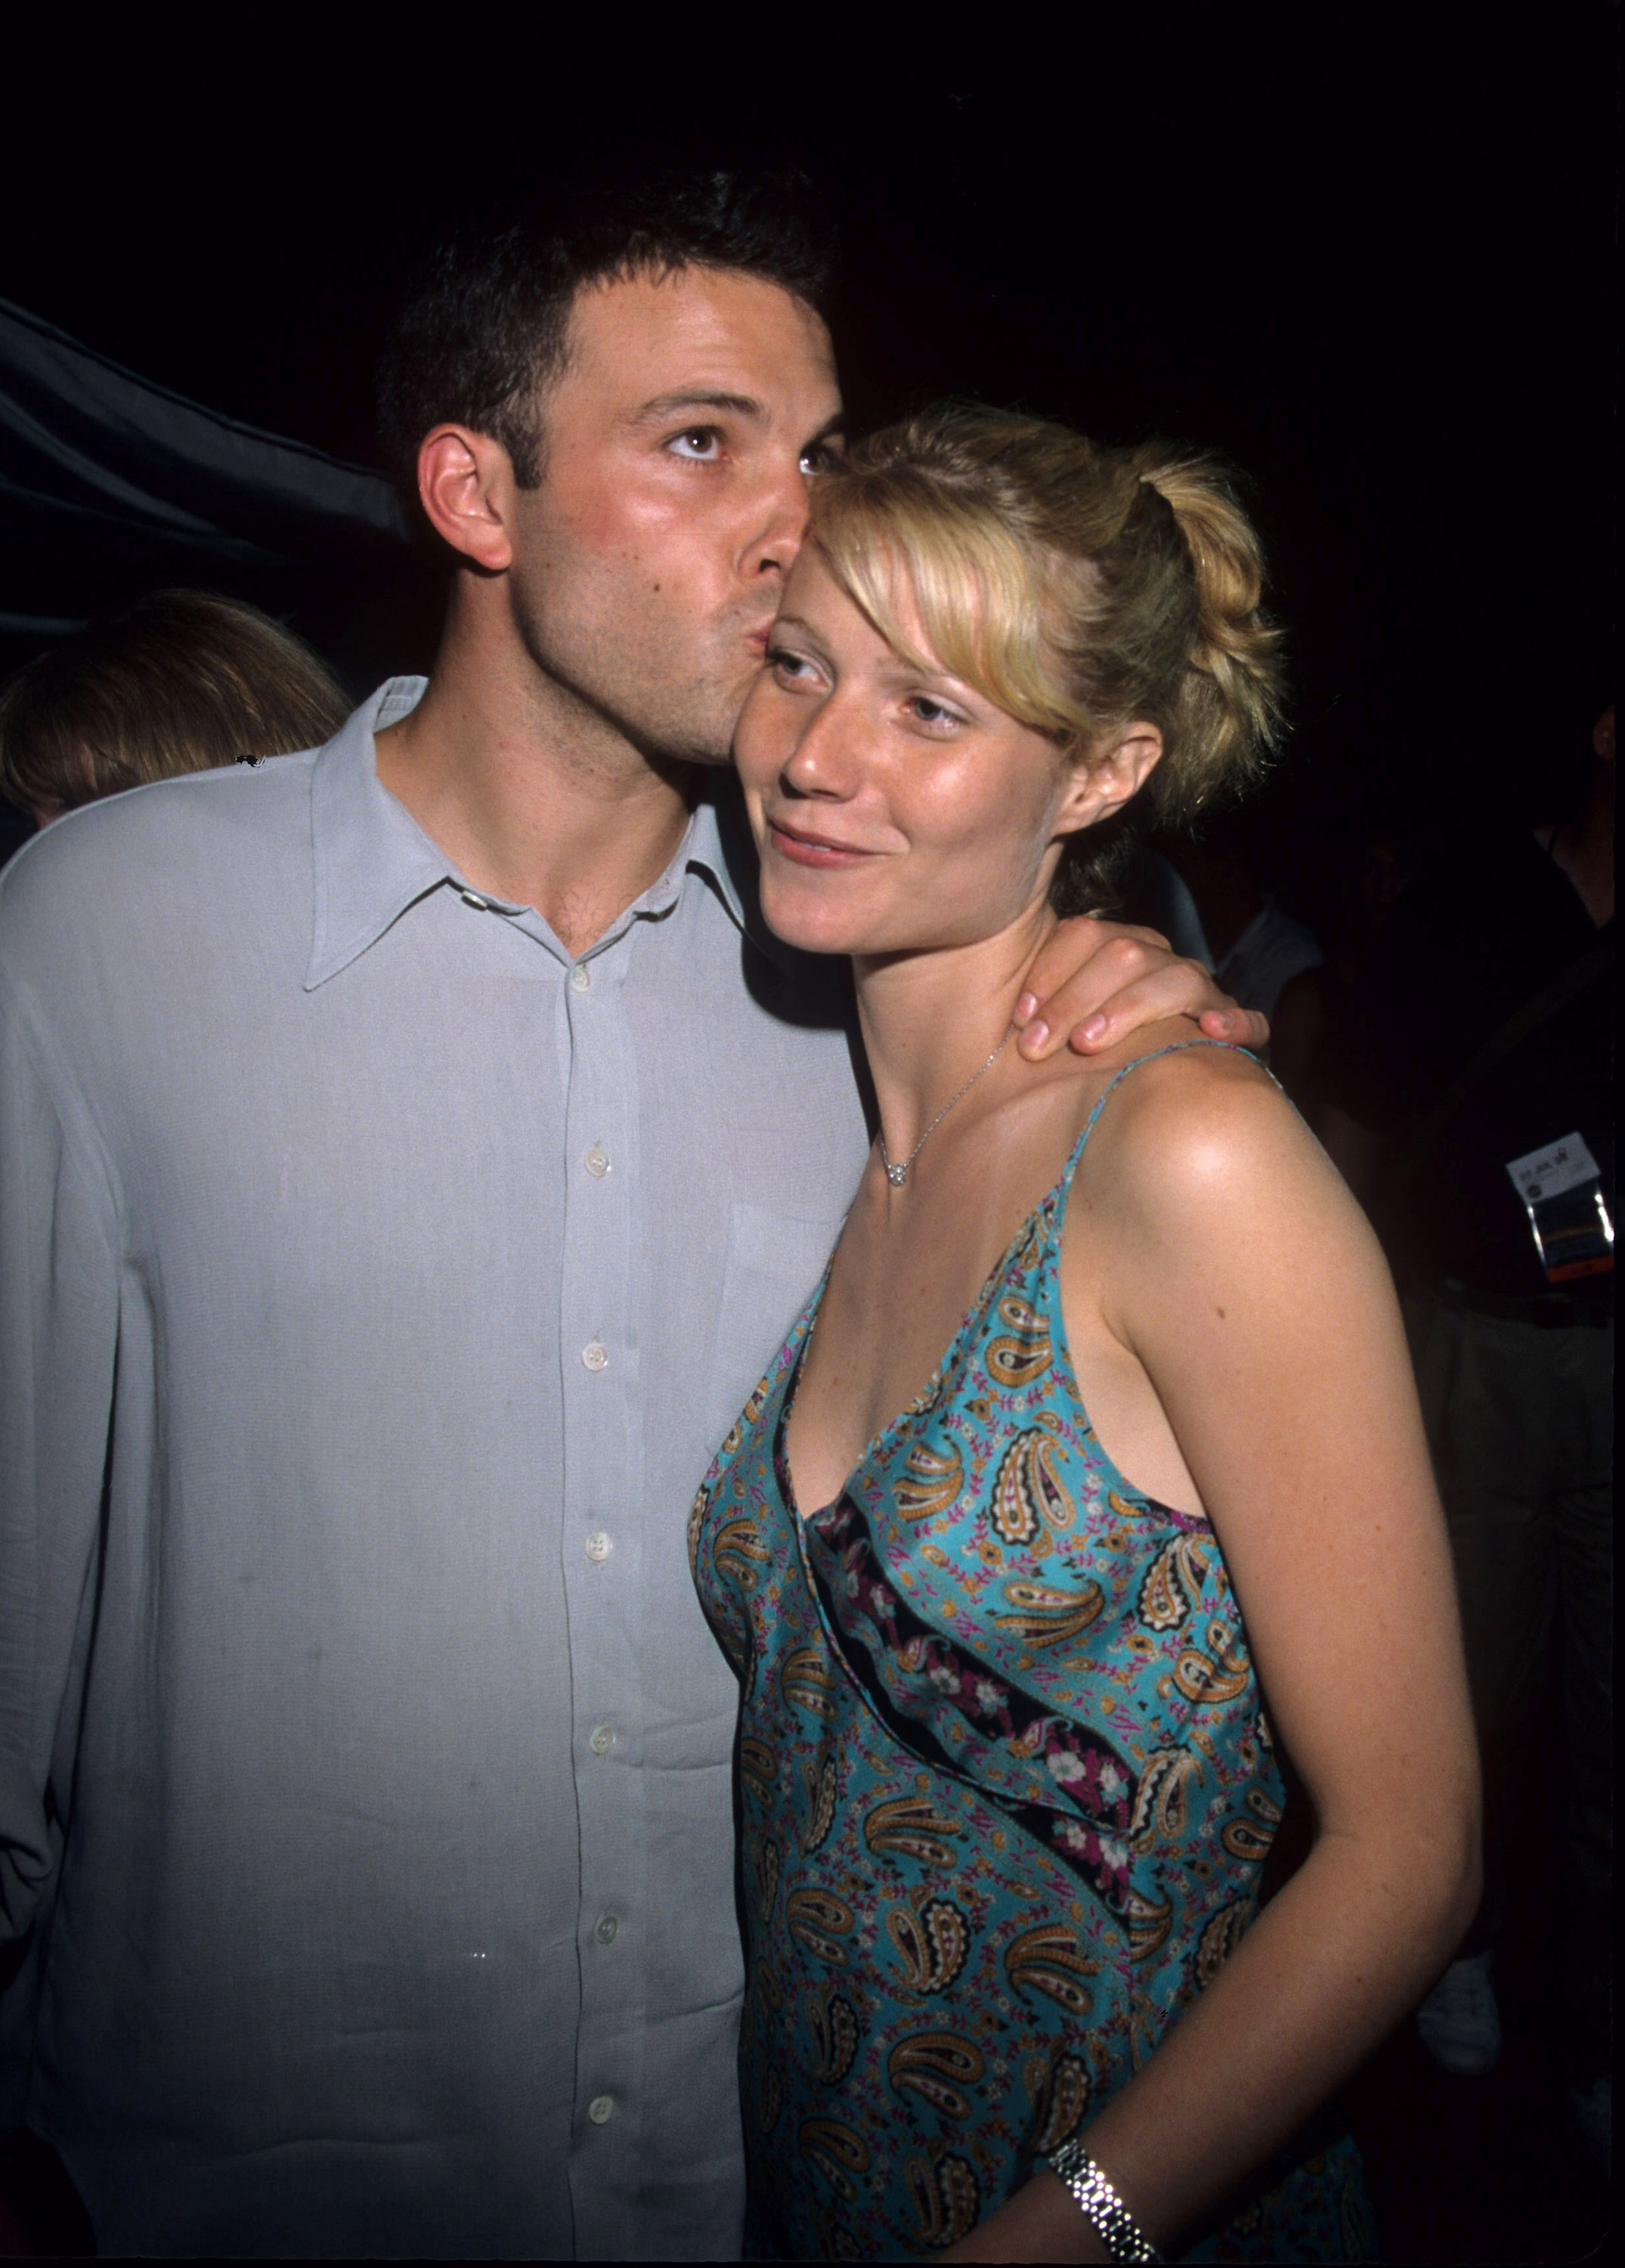 Ben Affleck and Gwyneth Paltrow at the premiere of "Armageddon," 1998 | Source: Getty Images